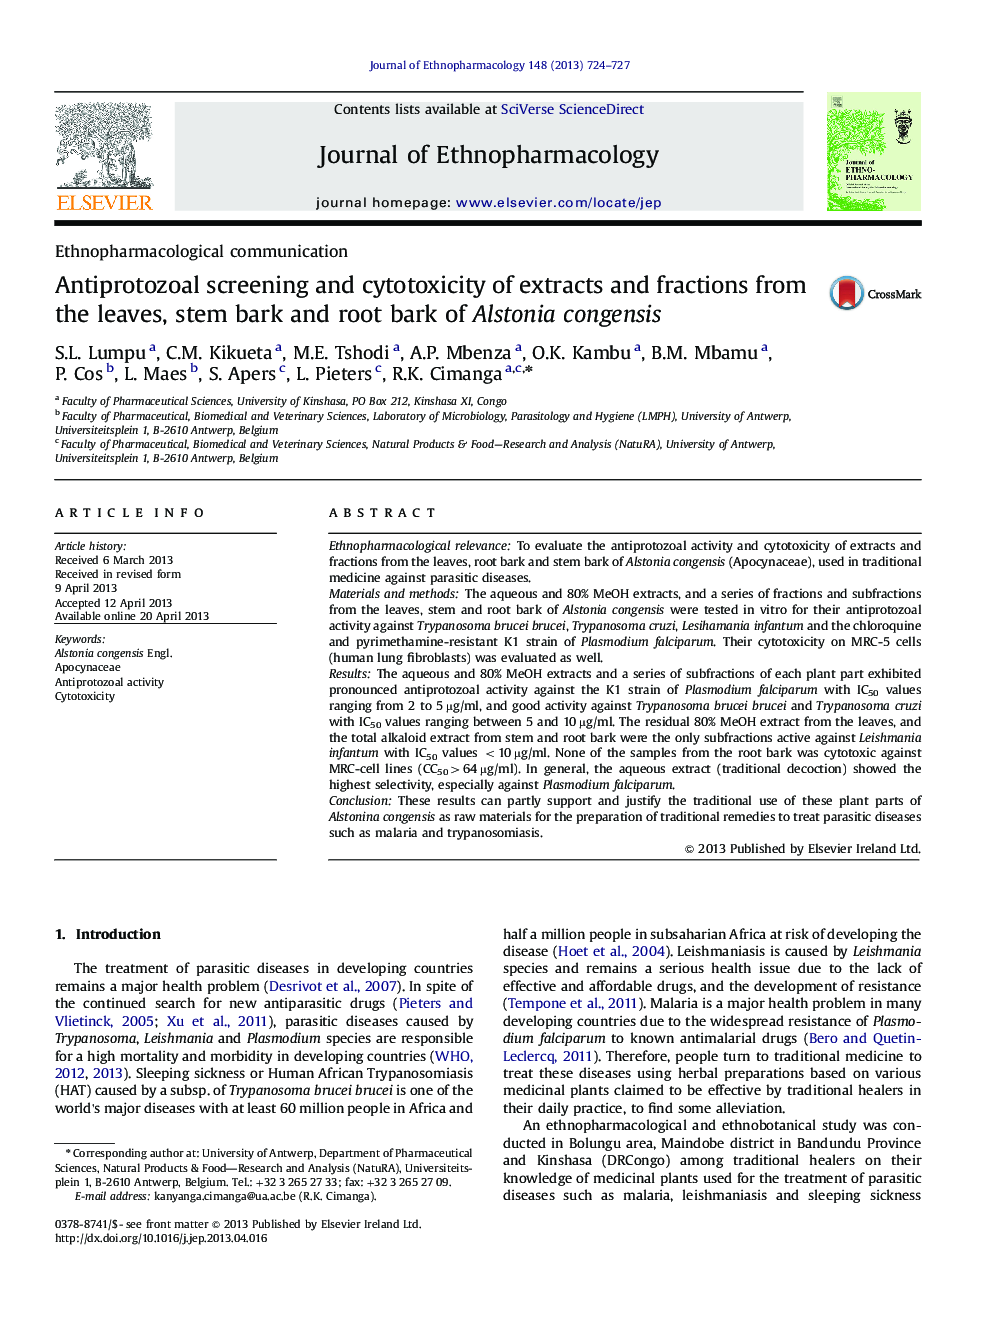 Ethnopharmacological communicationAntiprotozoal screening and cytotoxicity of extracts and fractions from the leaves, stem bark and root bark of Alstonia congensis